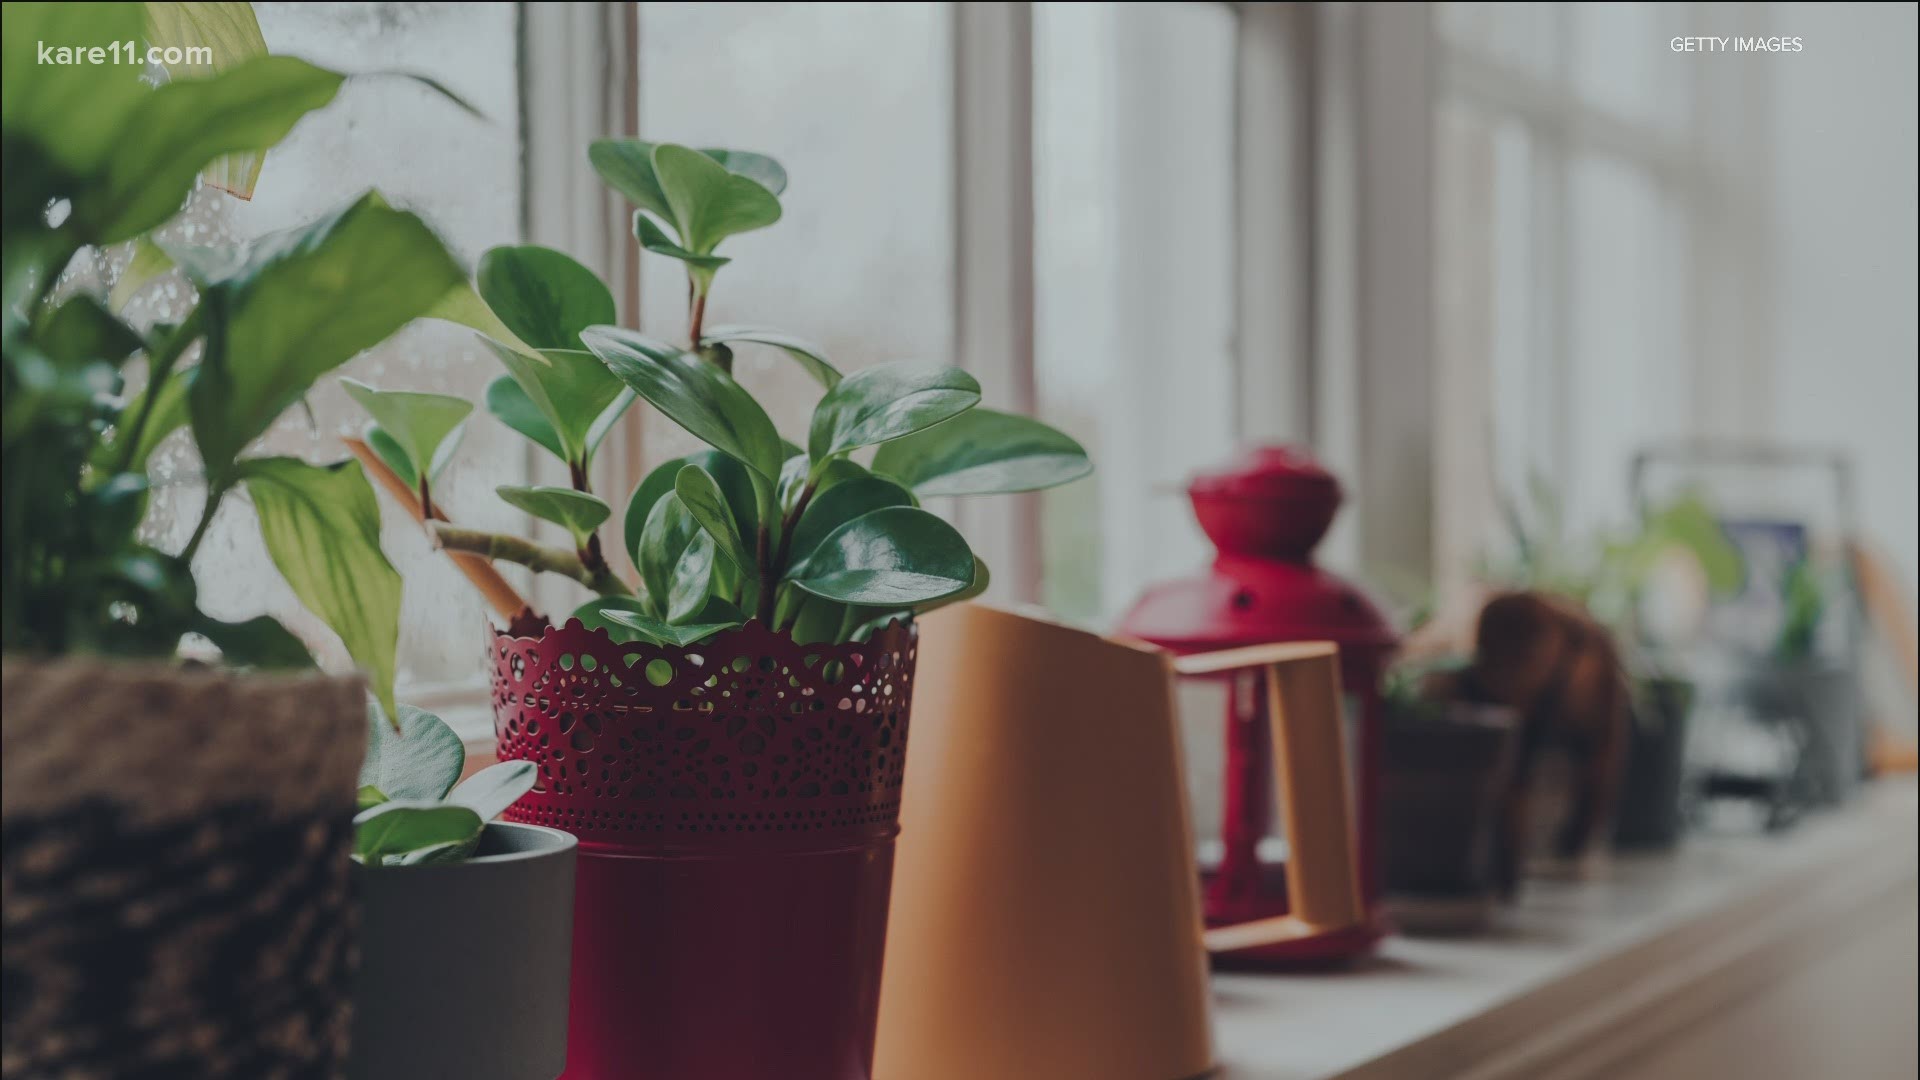 For a lot of reasons, having houseplants in the winter is a great idea. But the key to house plant success is the right light.